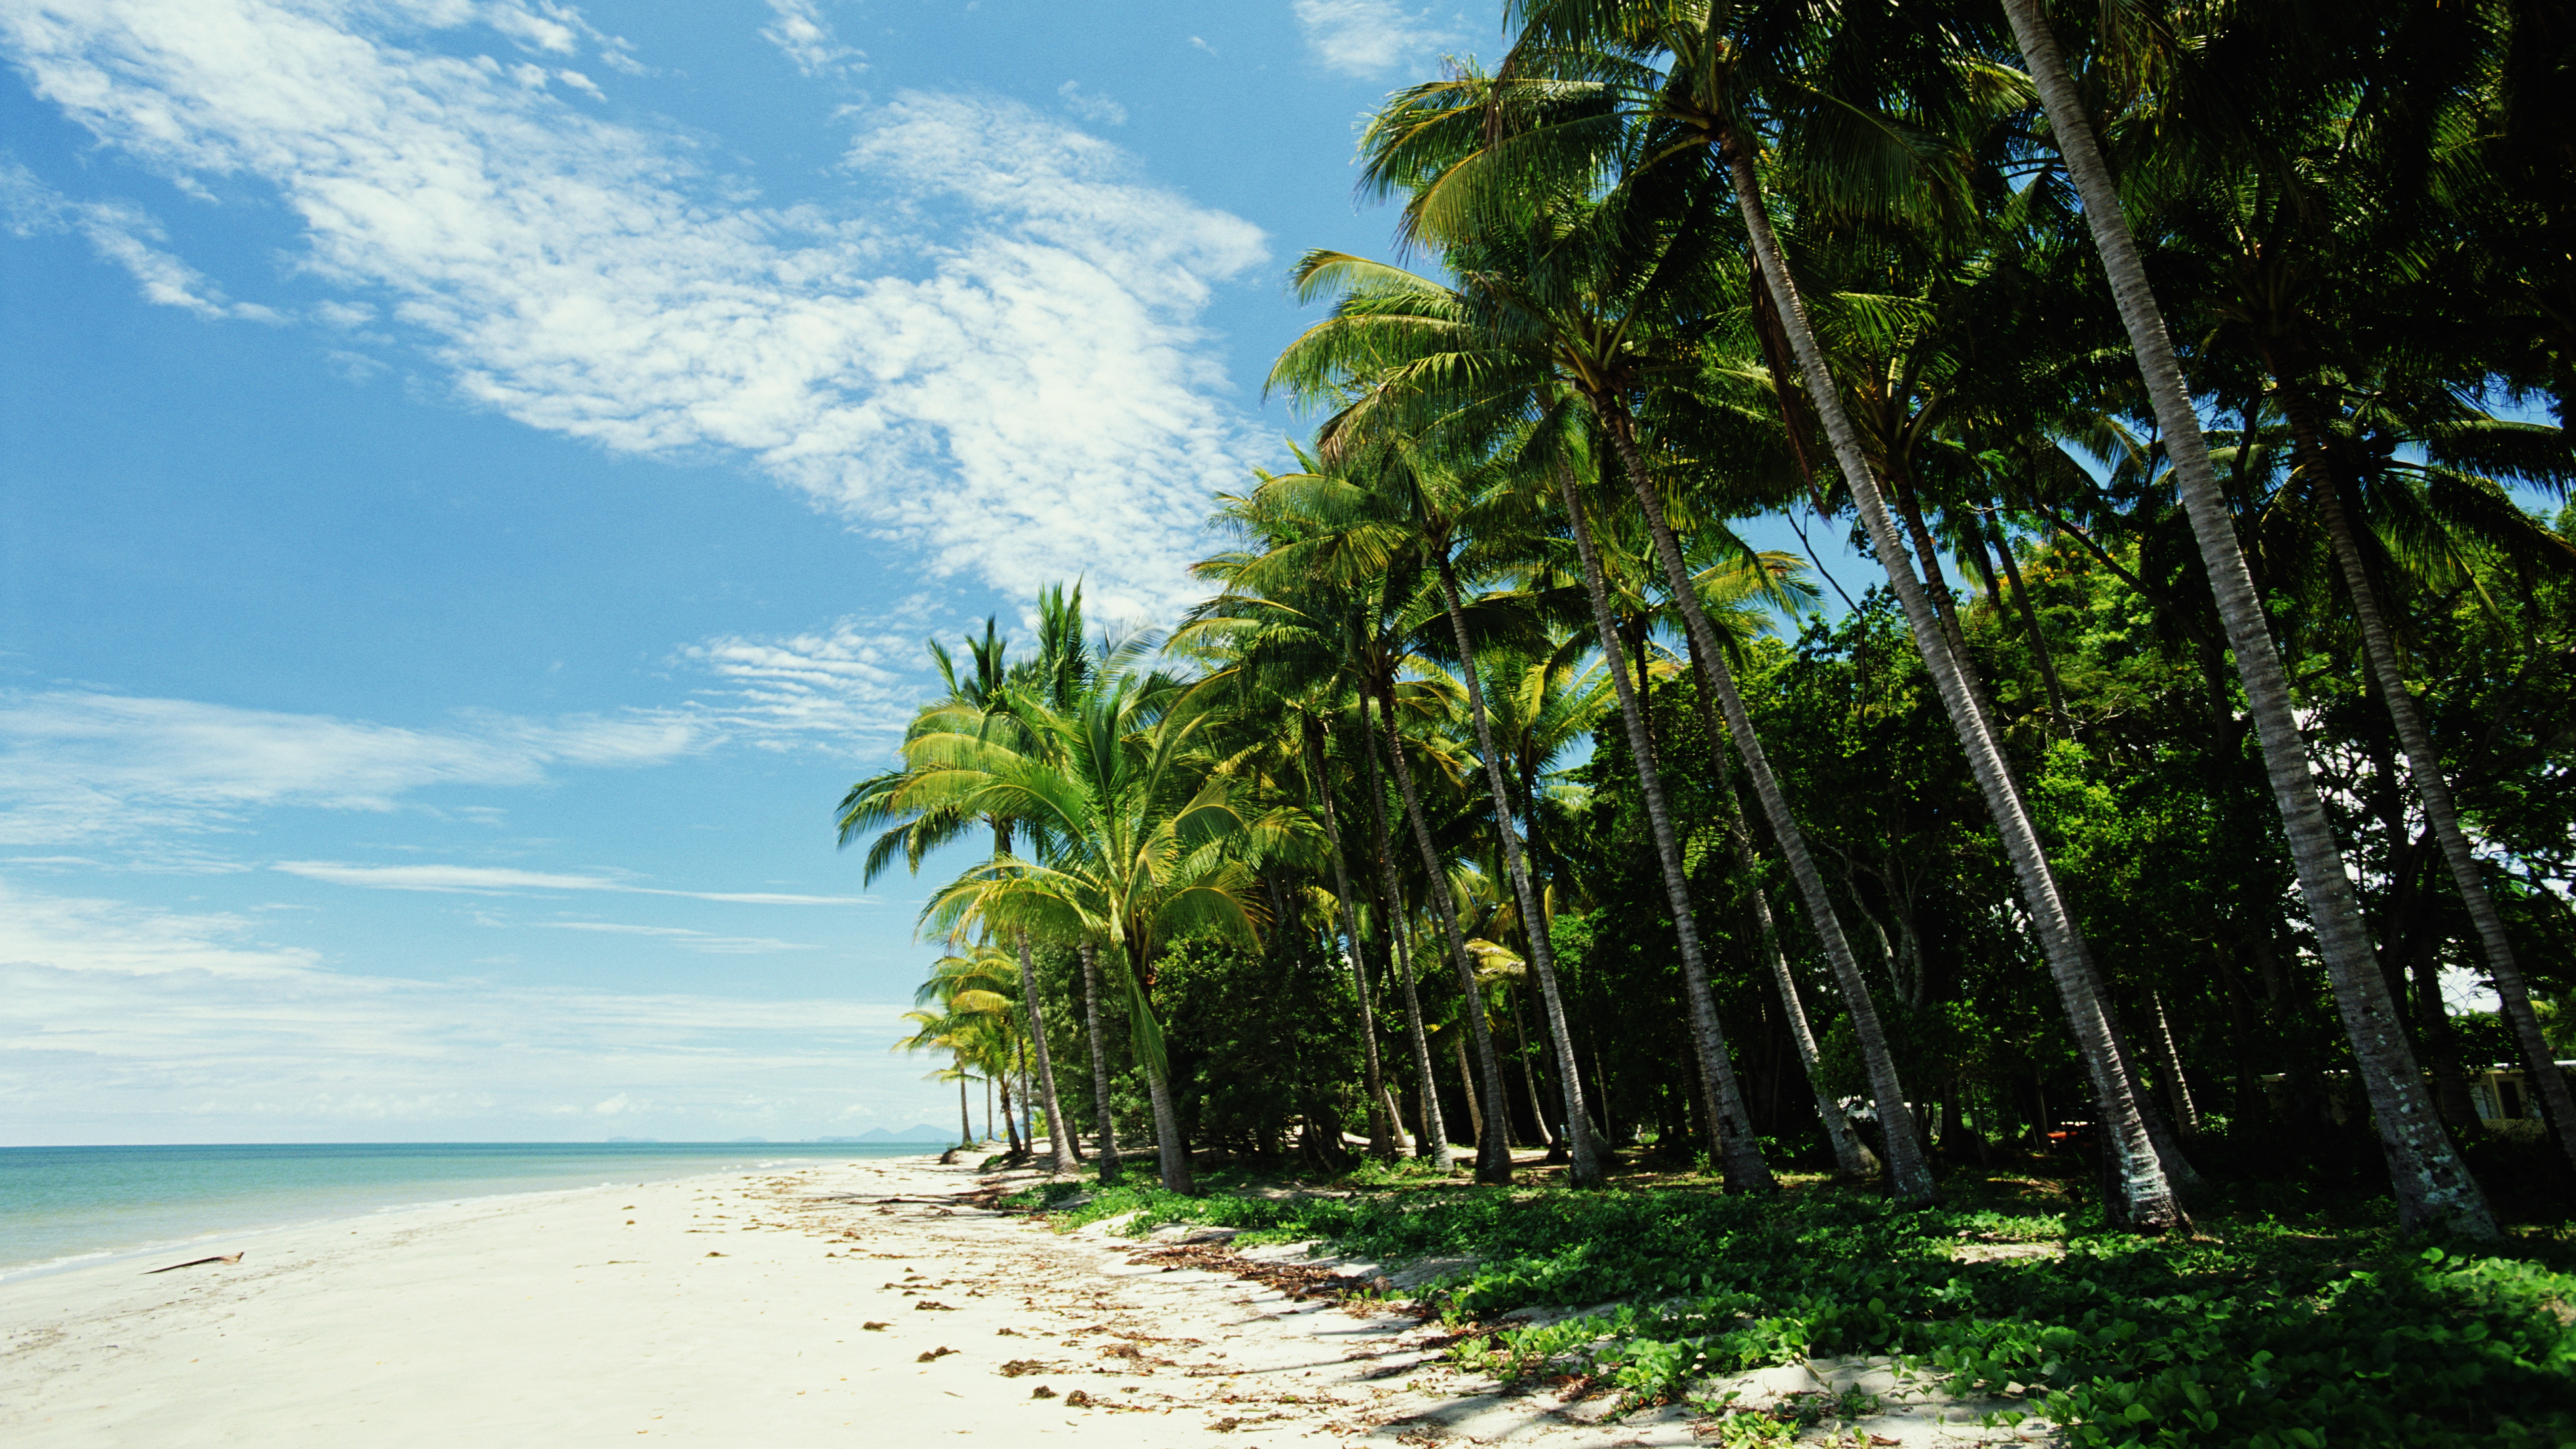 Green Palm Trees on White Sand Beach During Daytime. Wallpaper in 3840x2160 Resolution